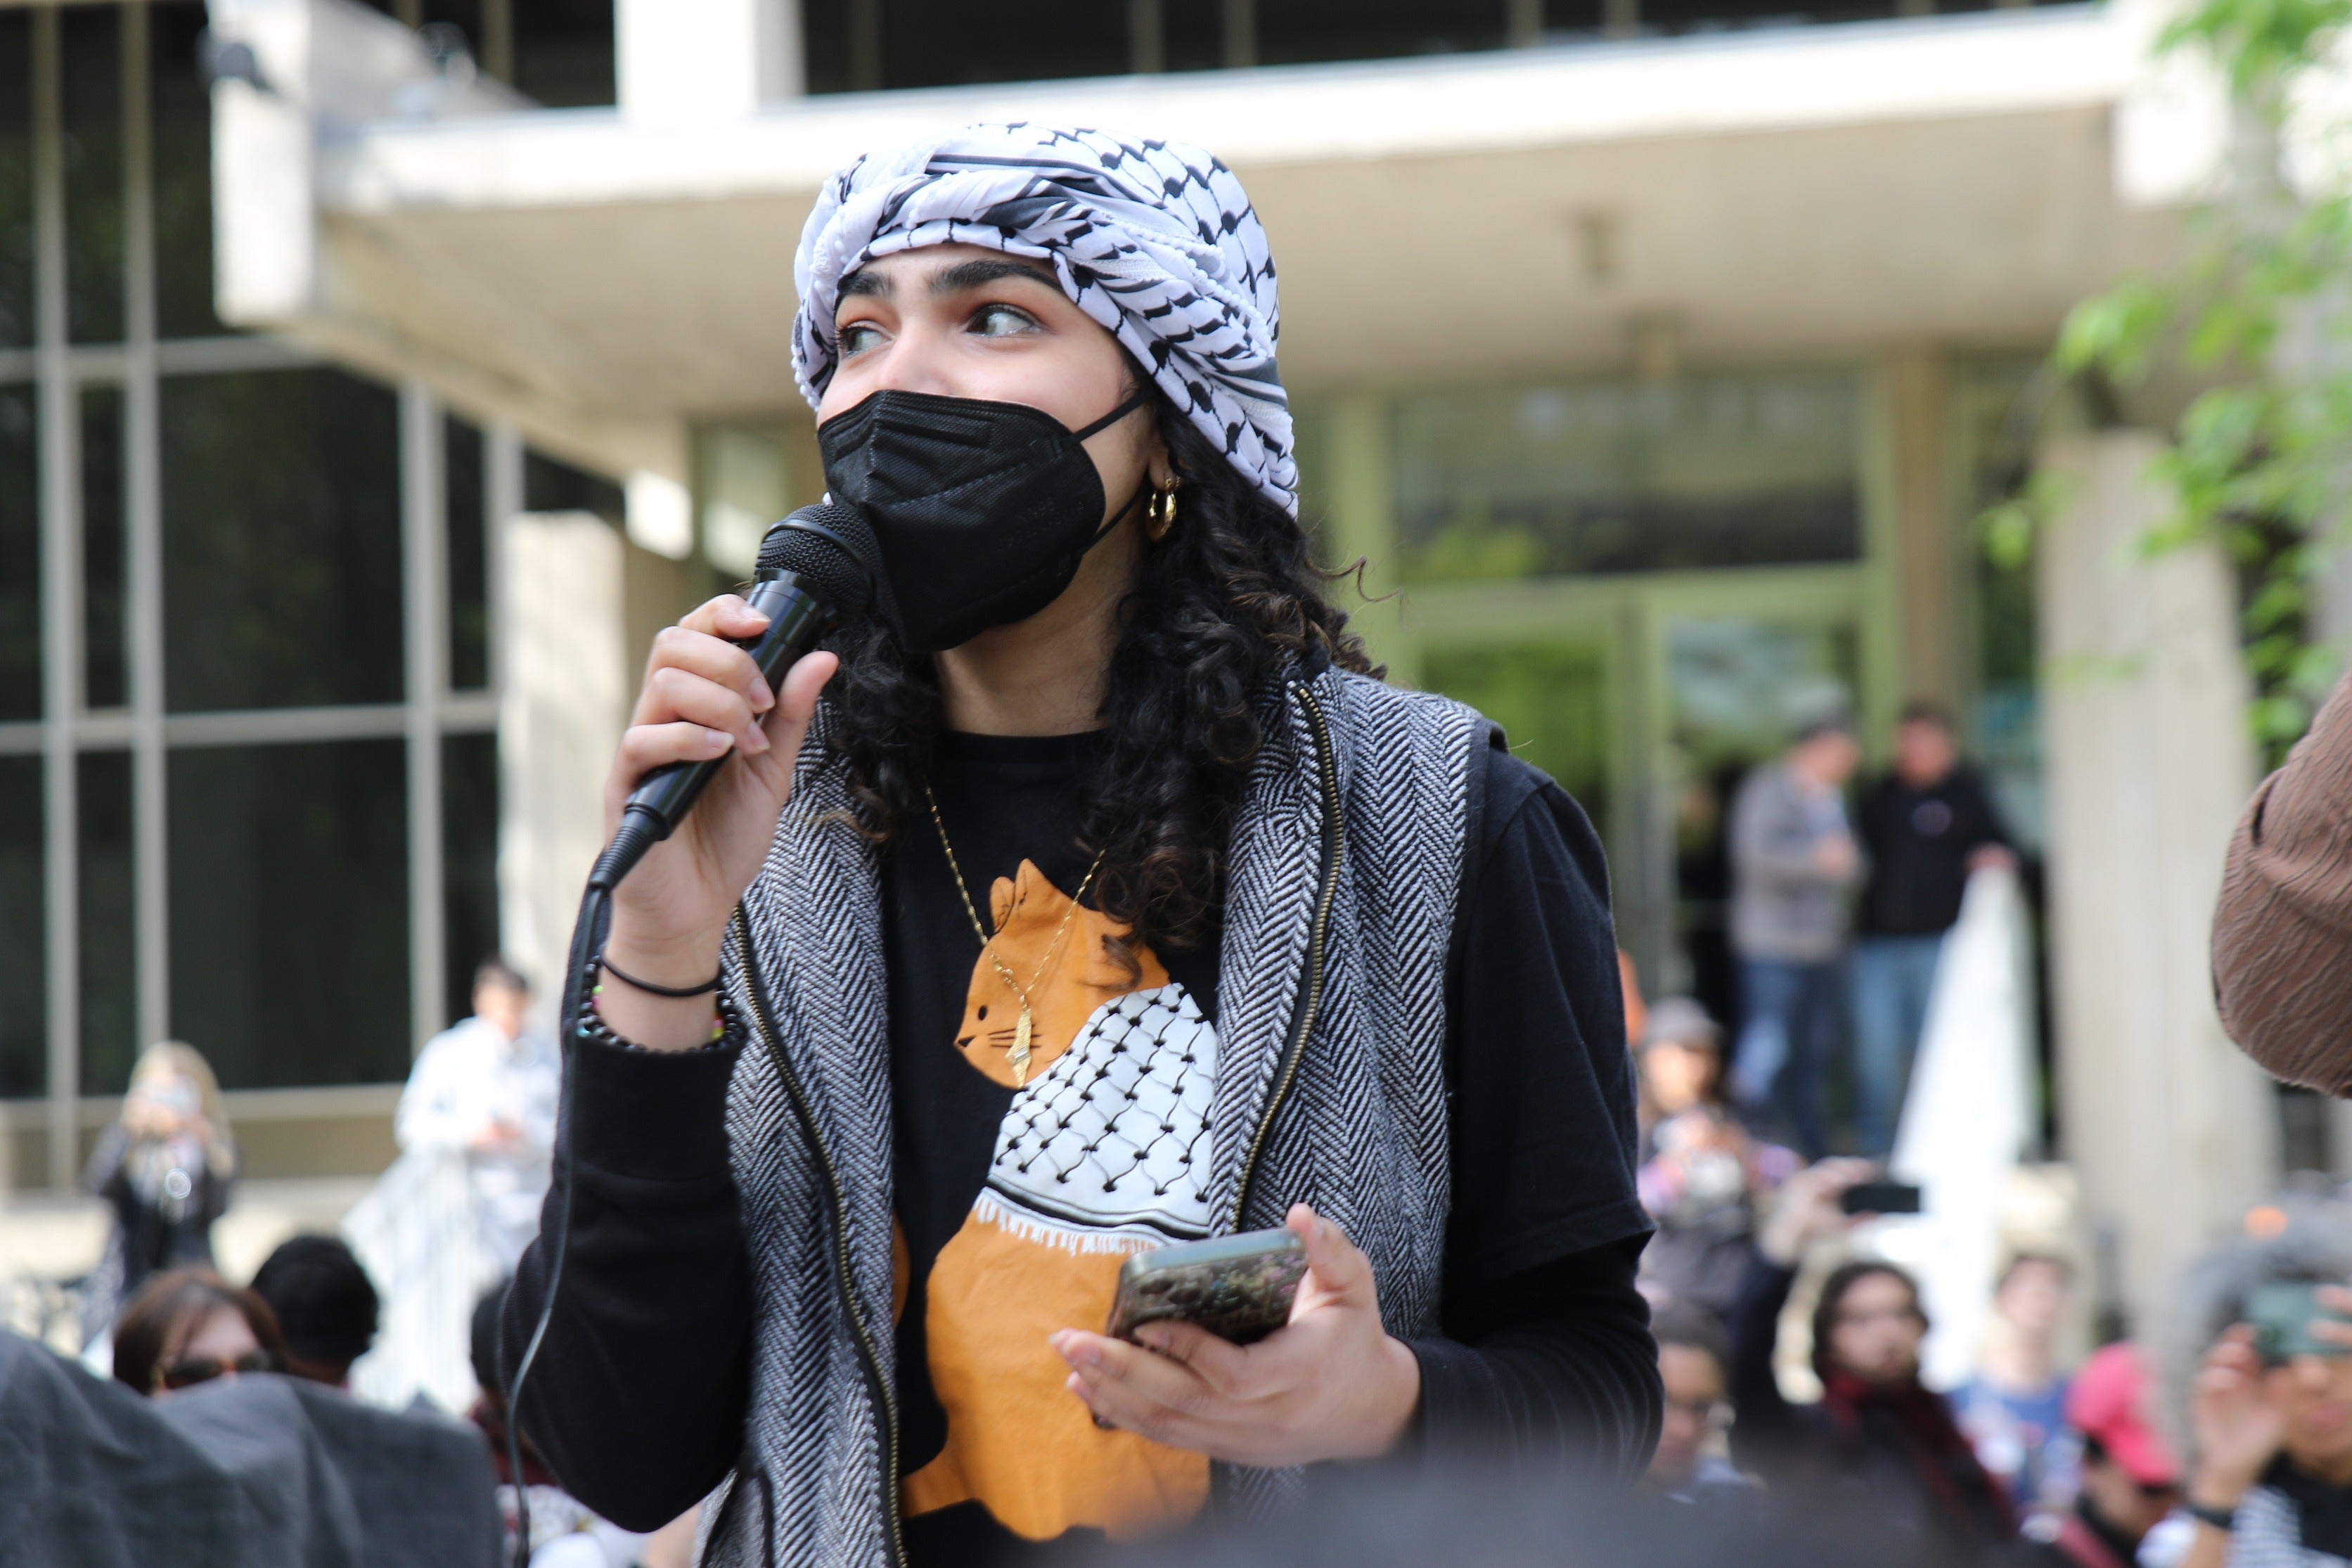 Cece, a Palestinian student at the University of Pennsylvania